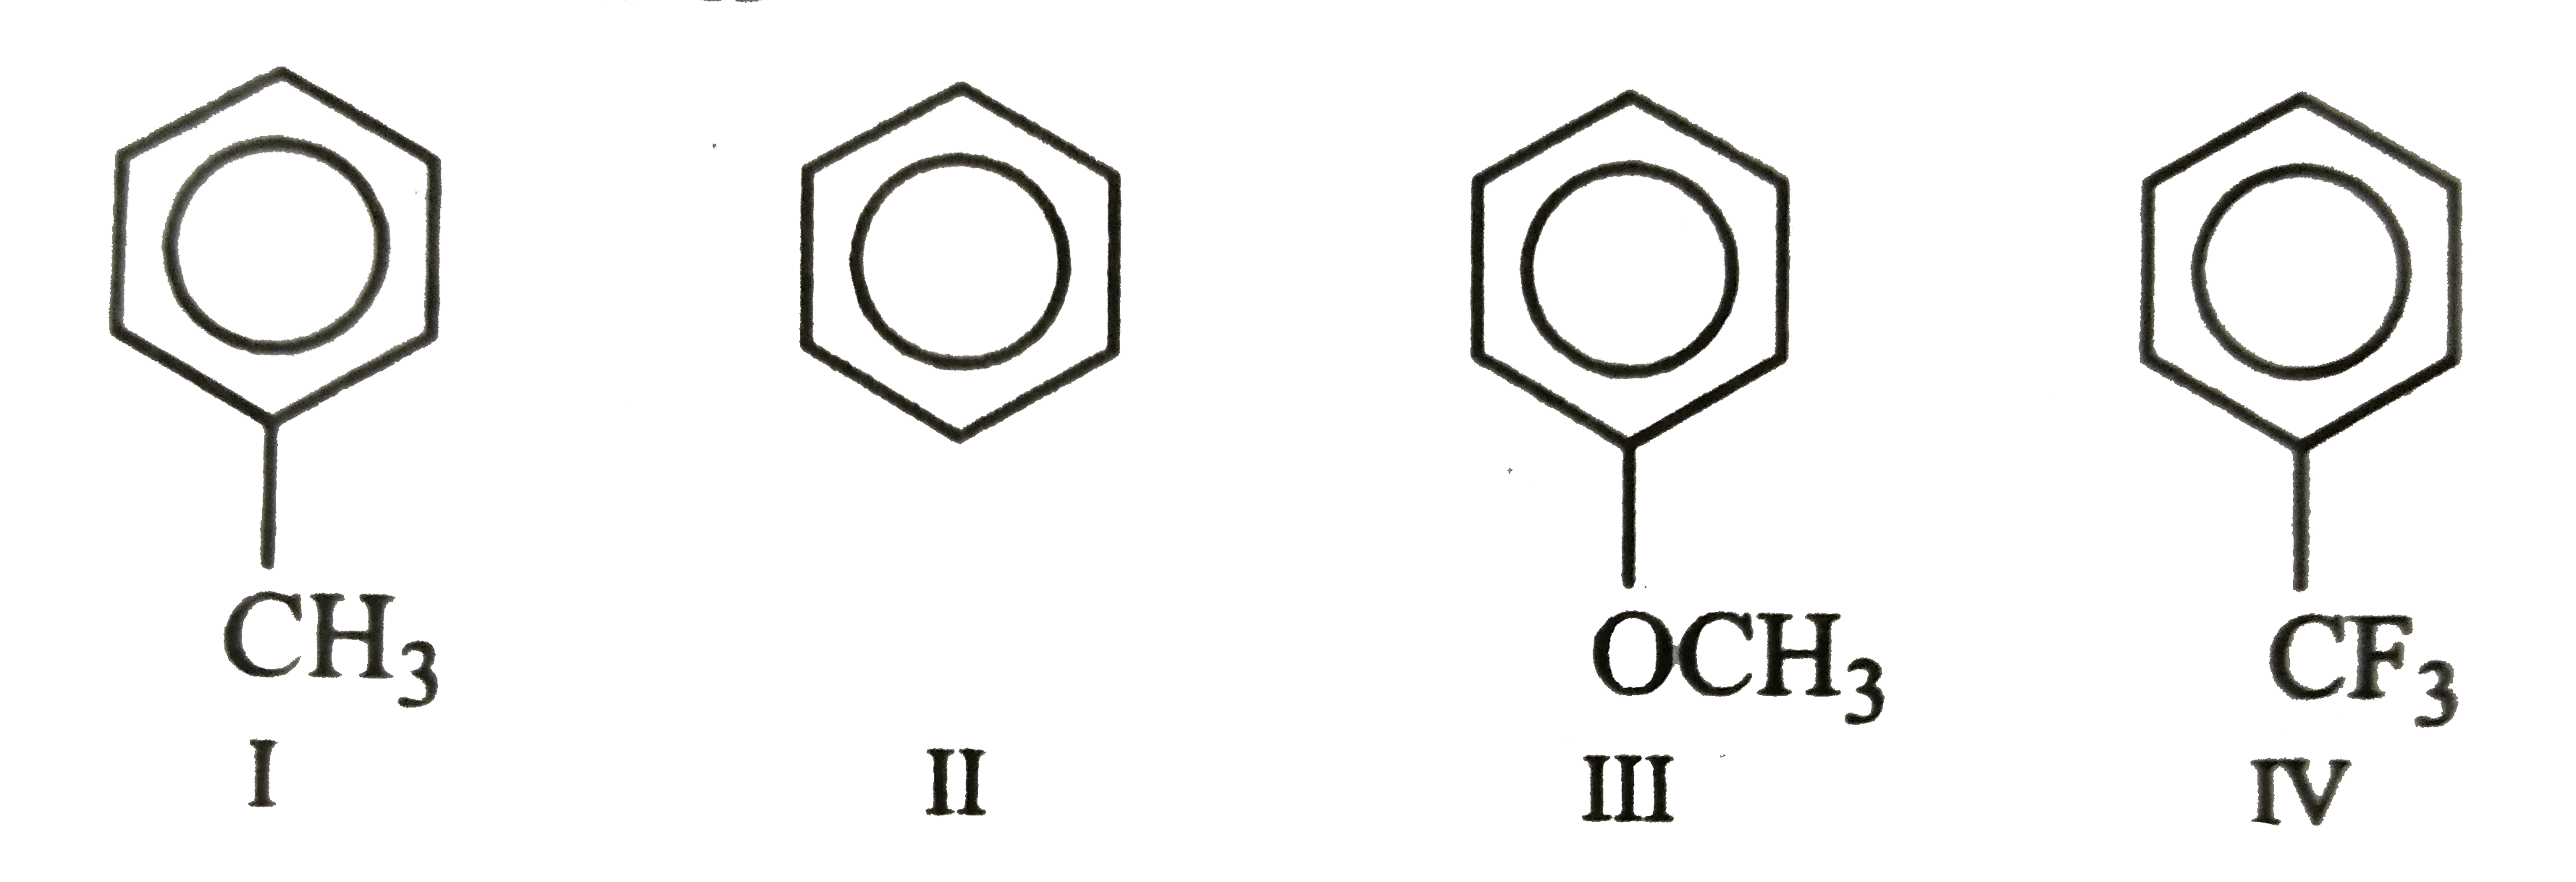 Among the following compounds, the decreasing order of reactivity towards electrophilic substitution is